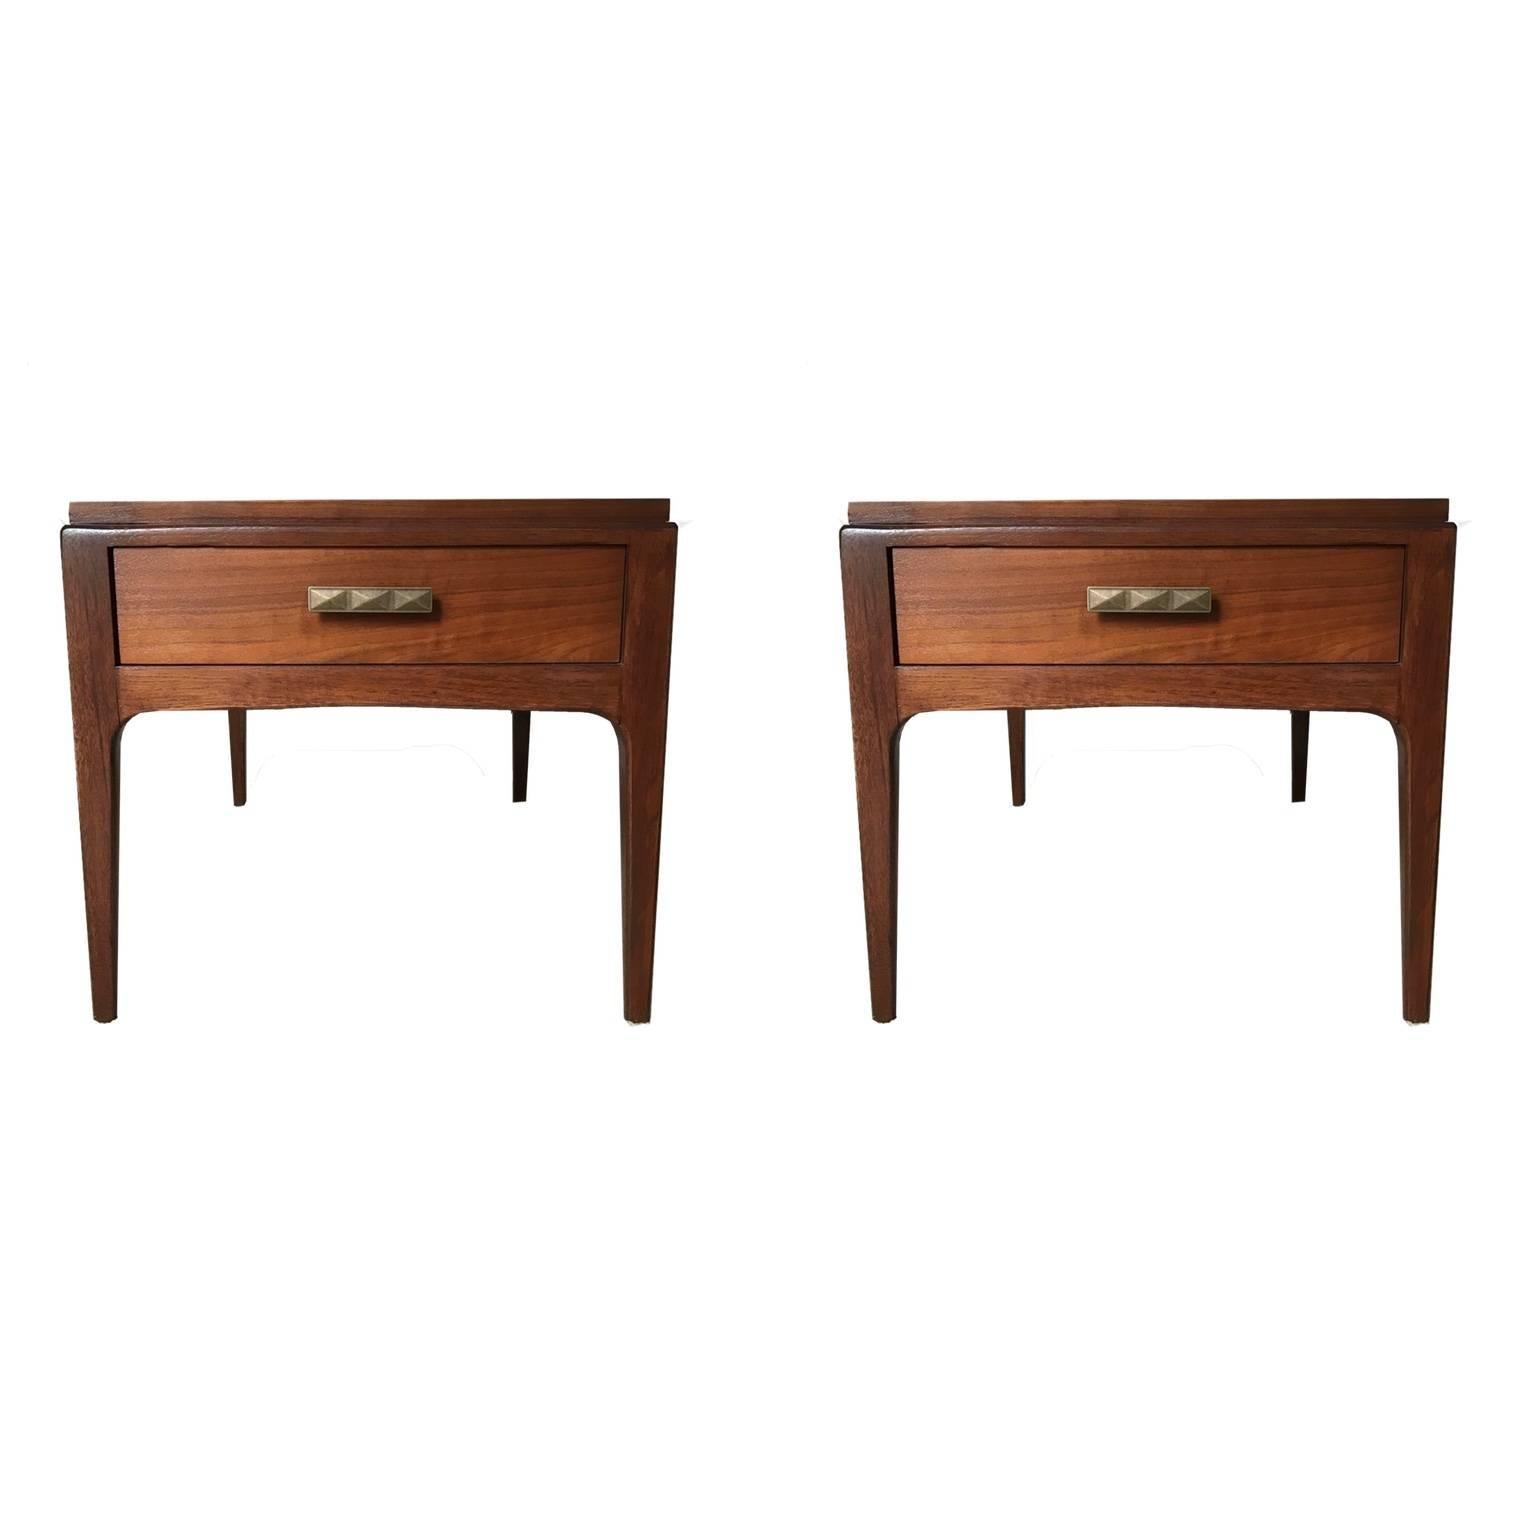 Freshly refinished sculptural pair of single drawer end tables or nightstands in walnut. Deep drawer. Great end tables or bedside tables.